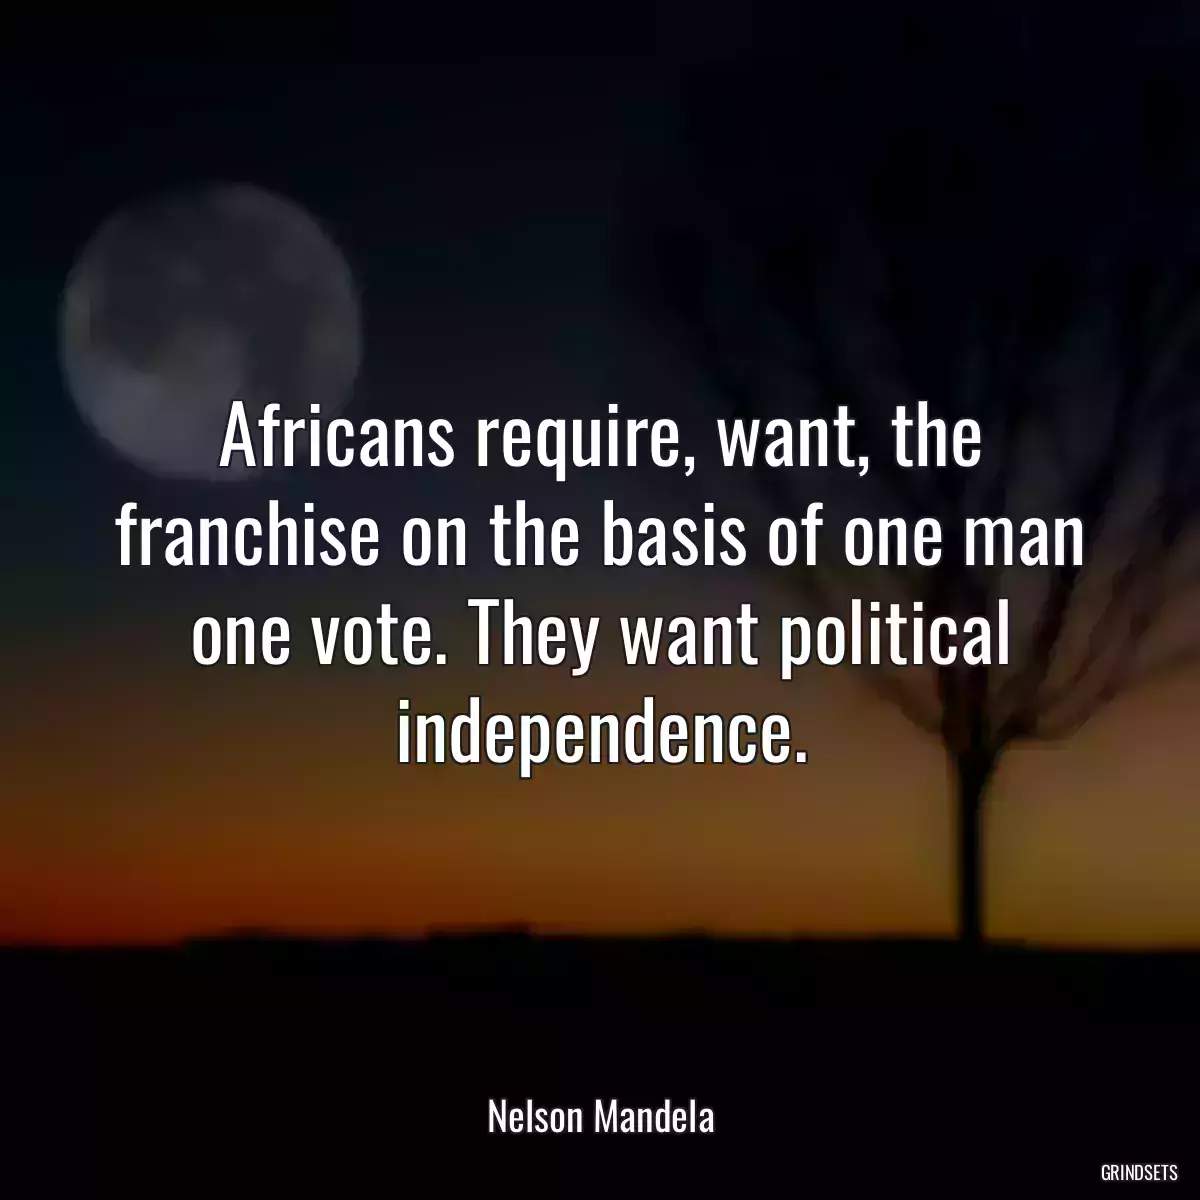 Africans require, want, the franchise on the basis of one man one vote. They want political independence.